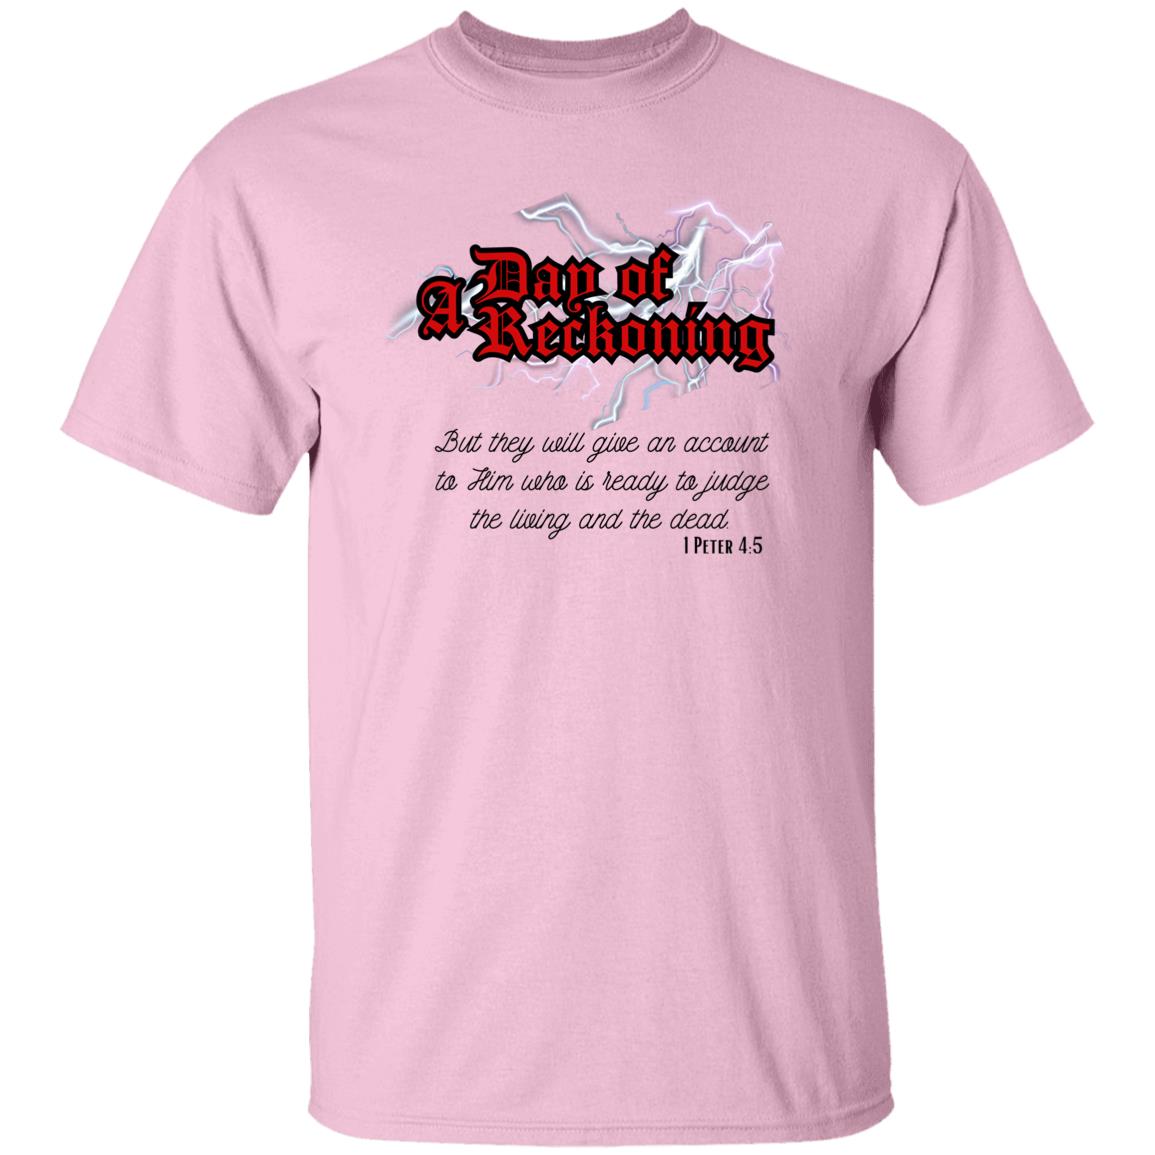 A Day Of Reckoning Verse T-Shirt